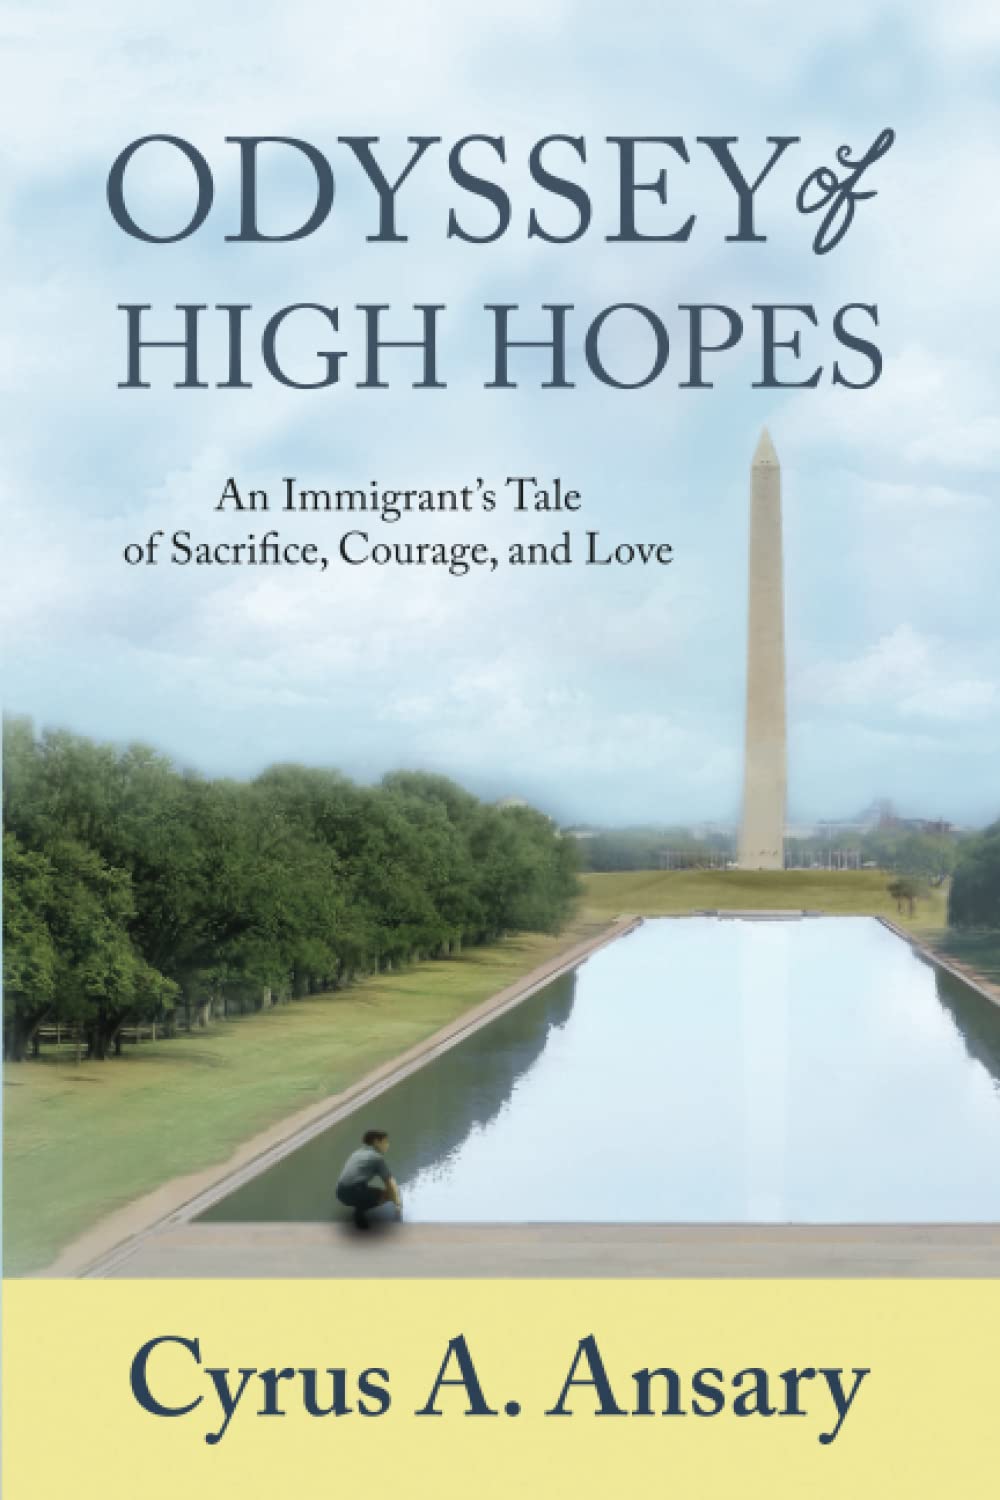 Odyssey of High Hopes: An Immigrant’s Tale Of Sacrifice, Courage, and Love